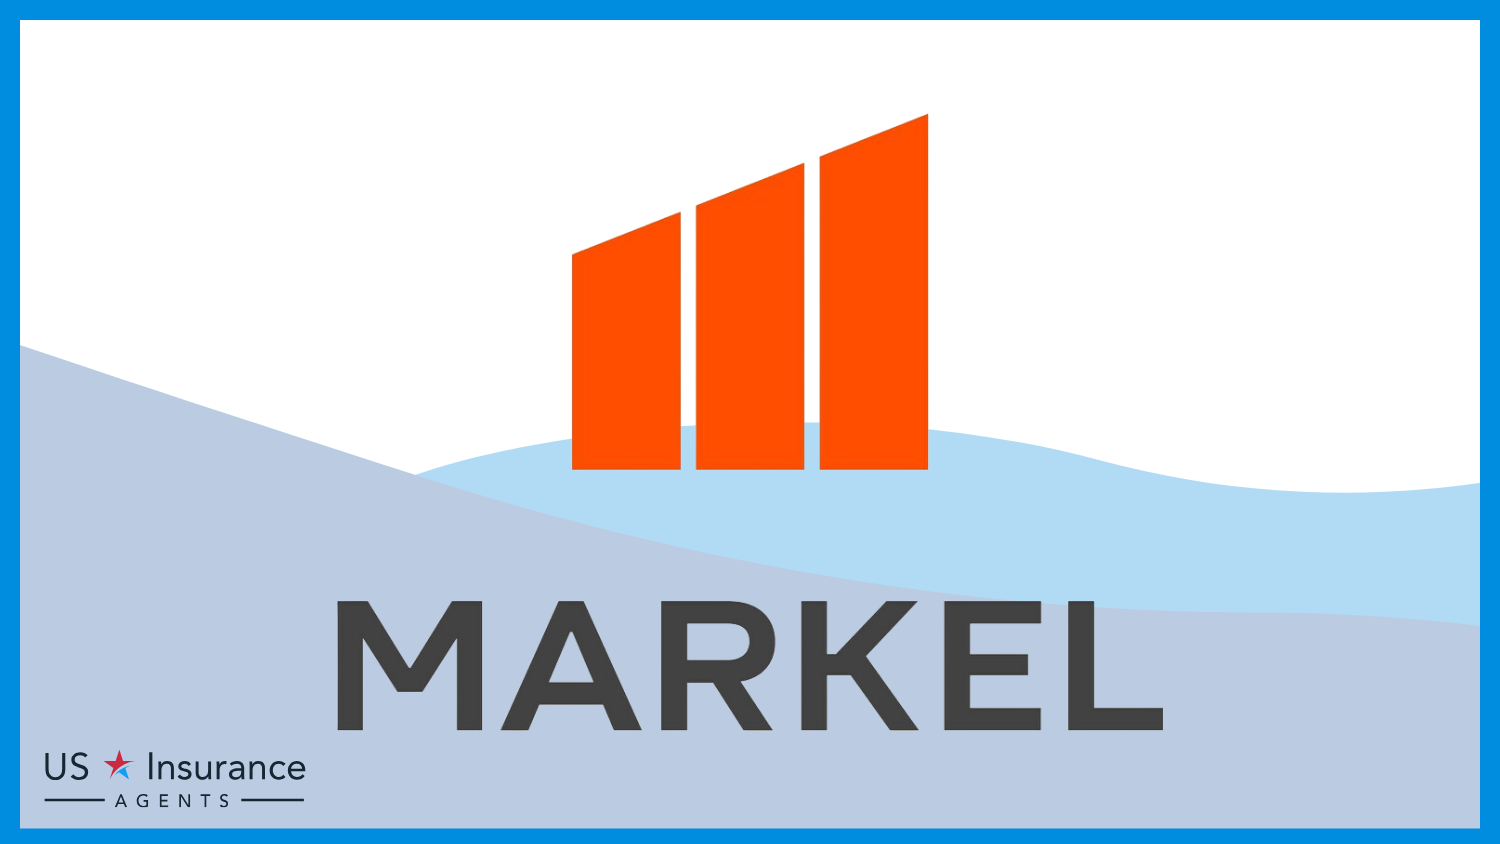 Markel: Best Business Insurance for Health Insurance Companies